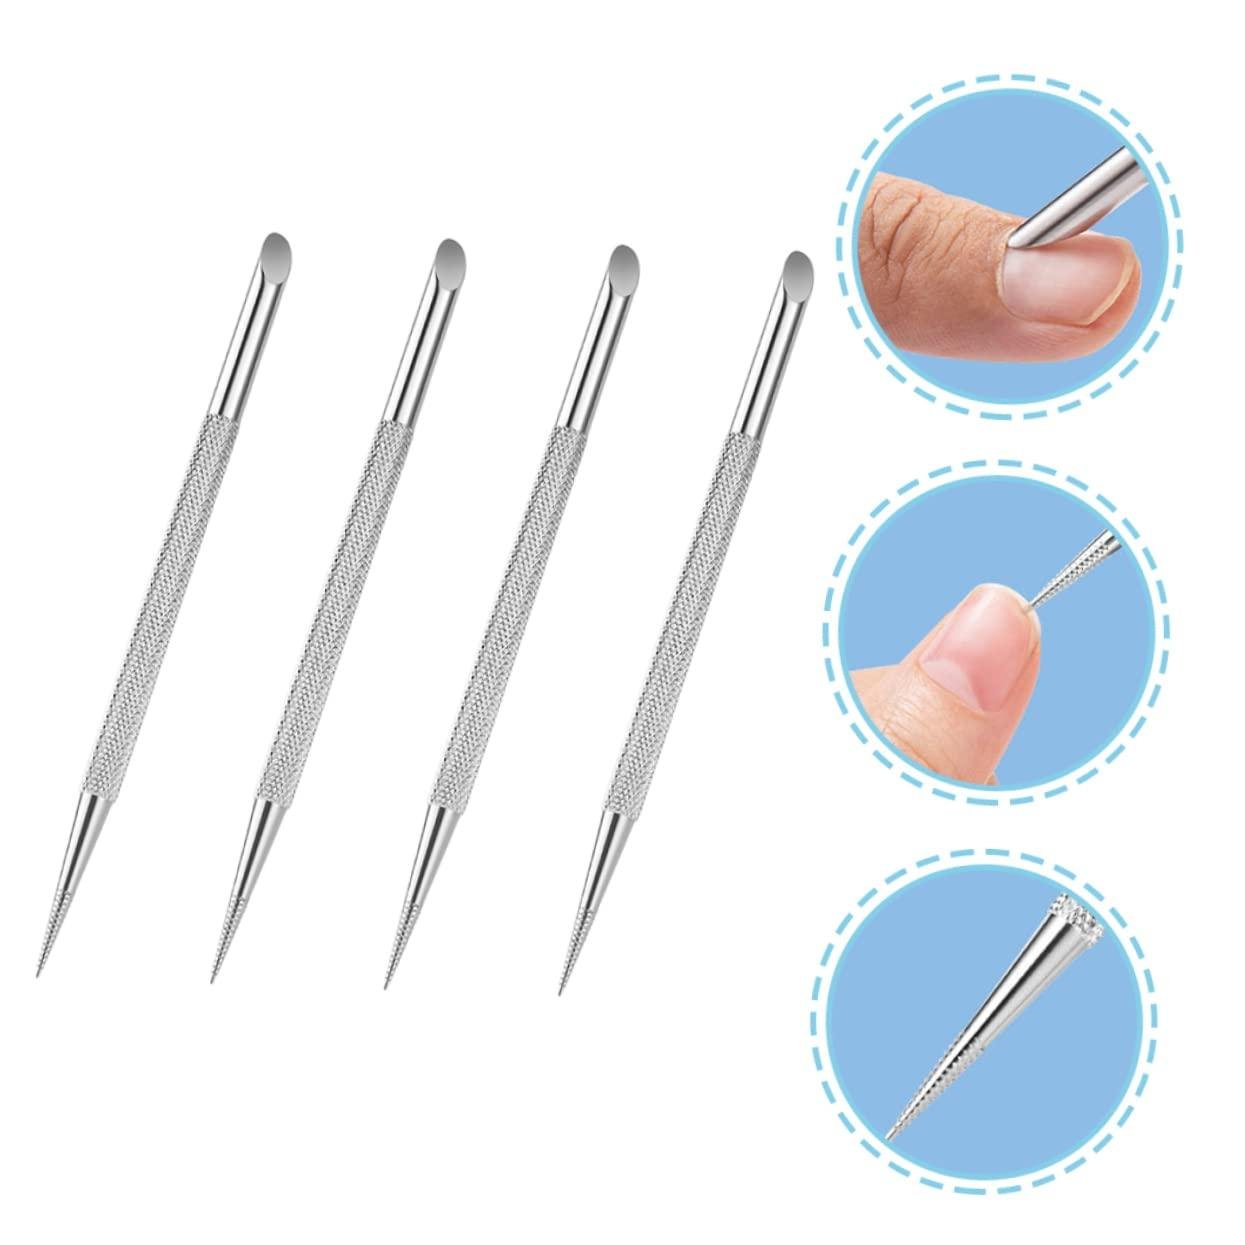 Safety Cuticle Pusher Nail Cleaner Nail Art Dotting Tools Stainless